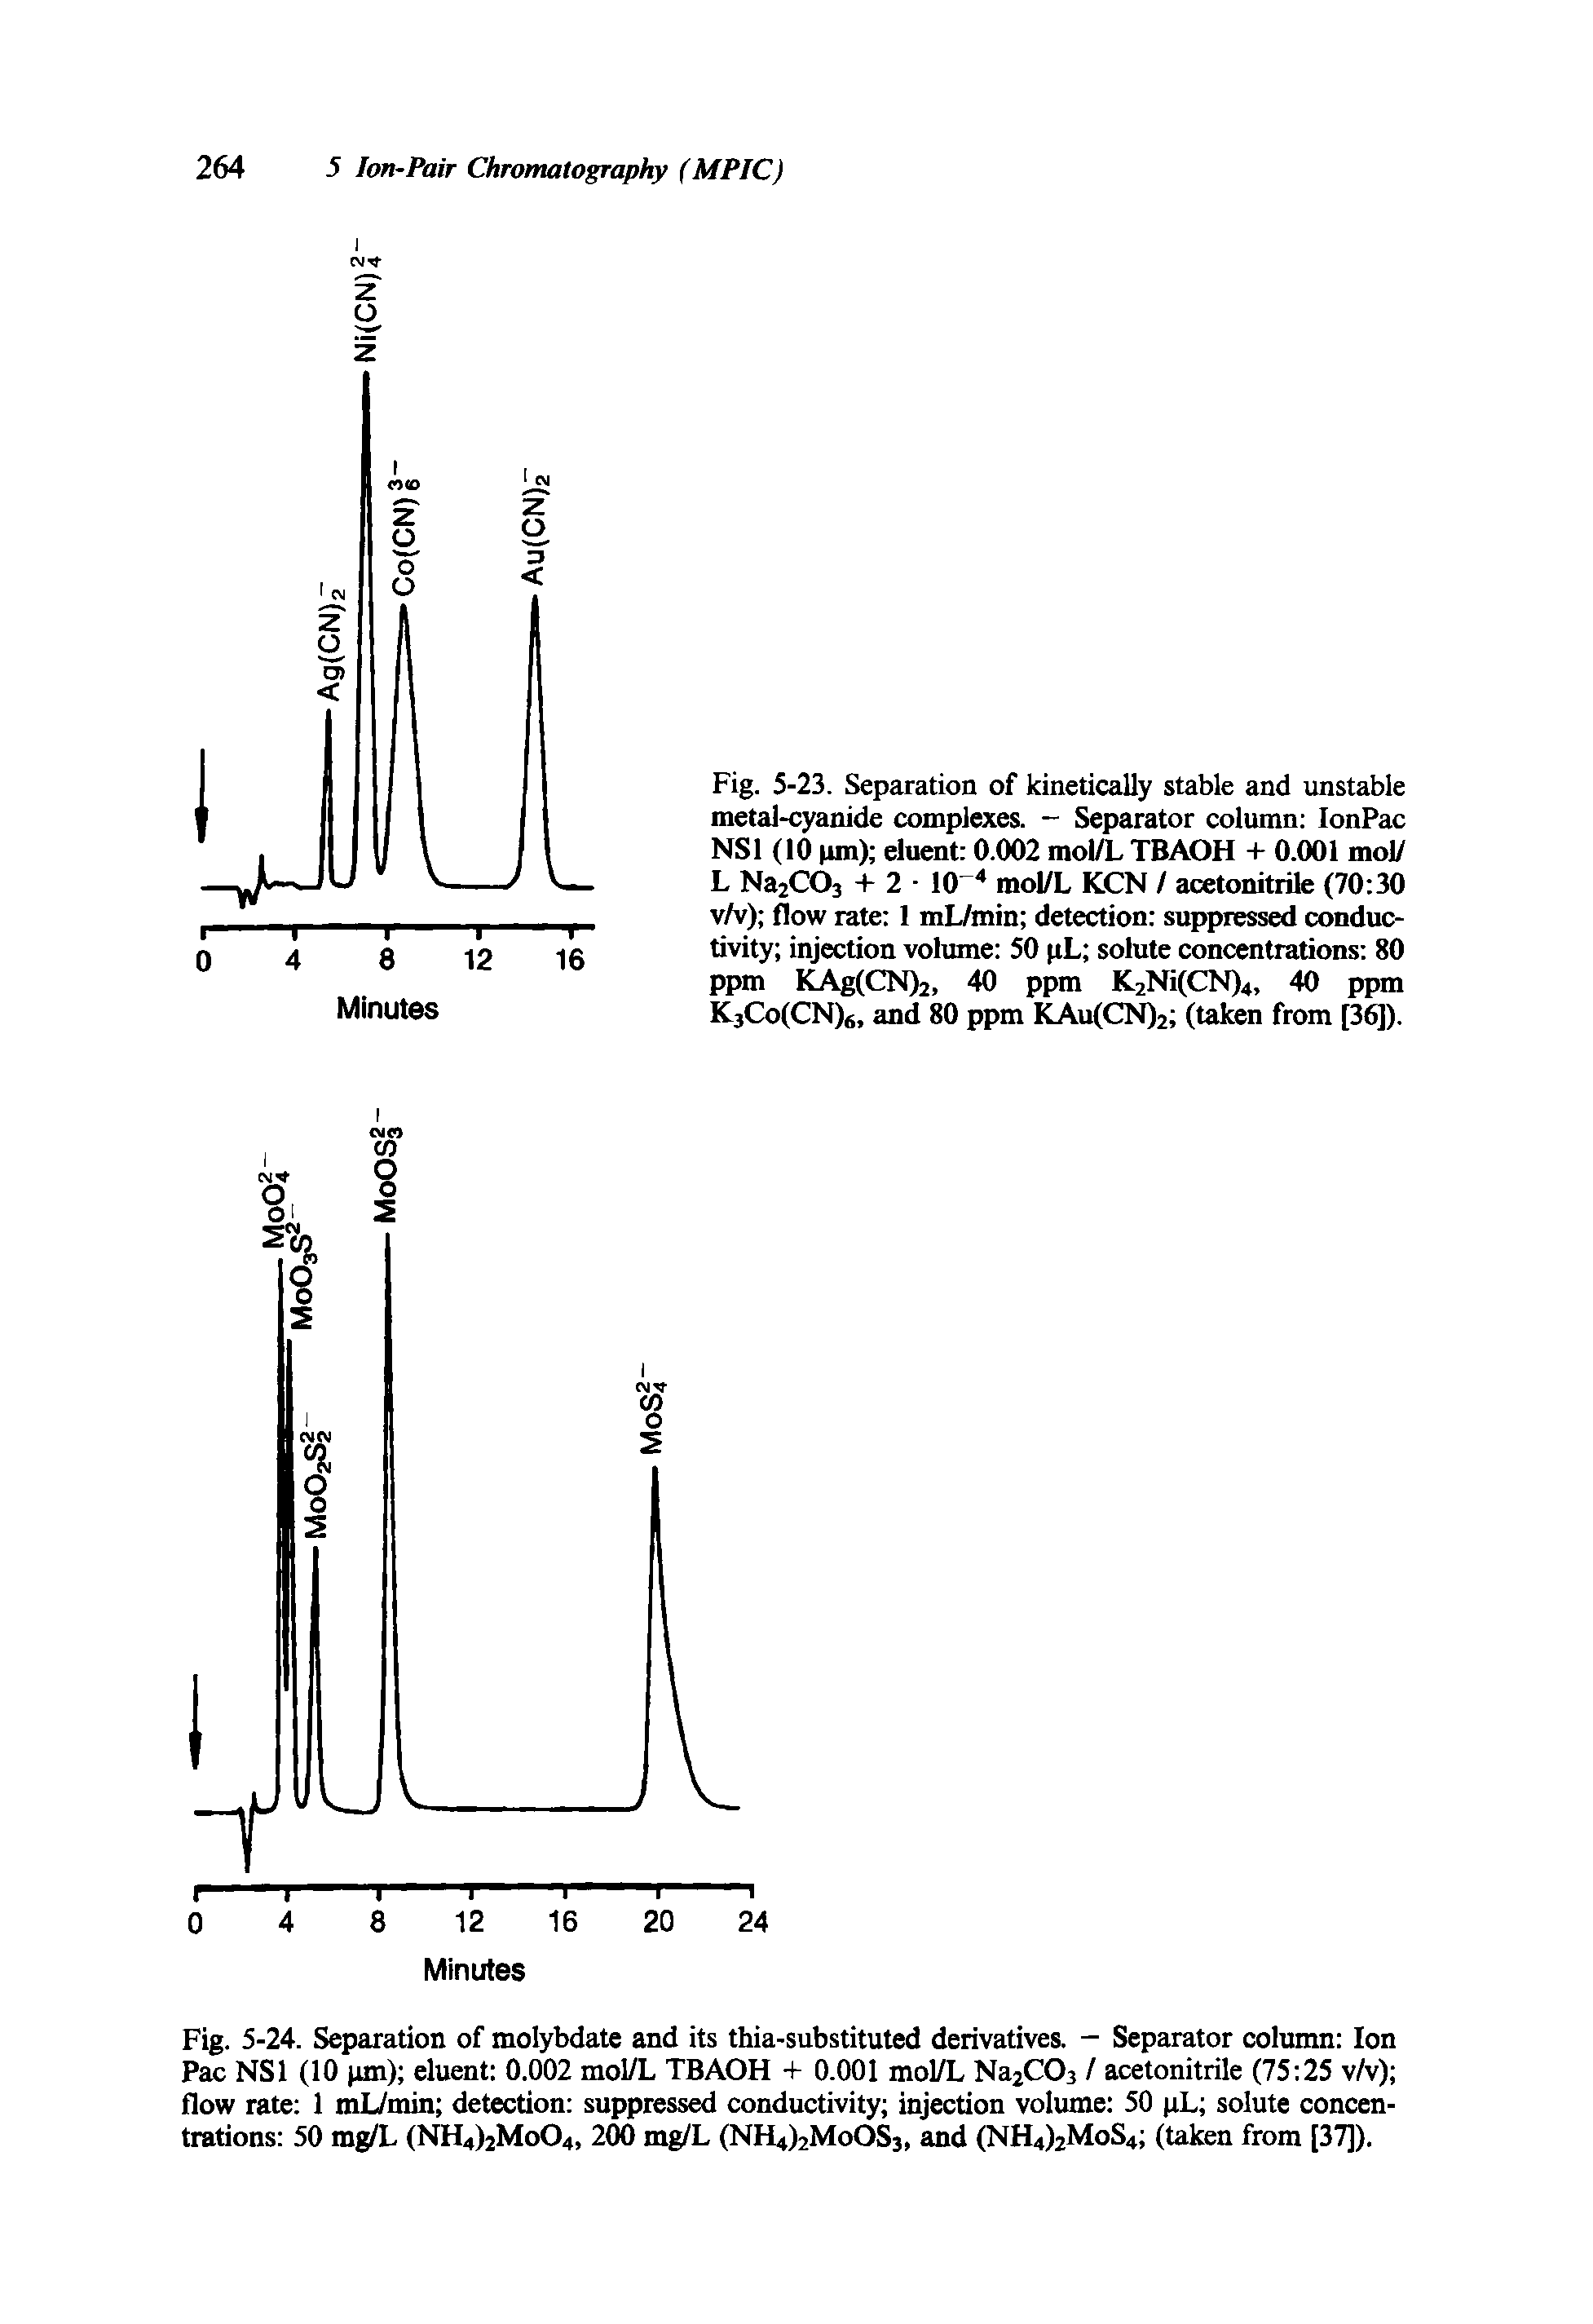 Fig. 5-24. Separation of molybdate and its thia-substituted derivatives. - Separator column Ion Pac NS1 (10 pm) eluent 0.002 mol/L TBAOH + 0.001 mol/L Na2C03 / acetonitrile (75 25 v/v) flow rate 1 mL/min detection suppressed conductivity injection volume 50 pL solute concentrations 50 mg/L (NH4)2Mo04, 200 mg/L (NH4)2MoOS3, and (NH4)2MoS4 (taken from [37]).